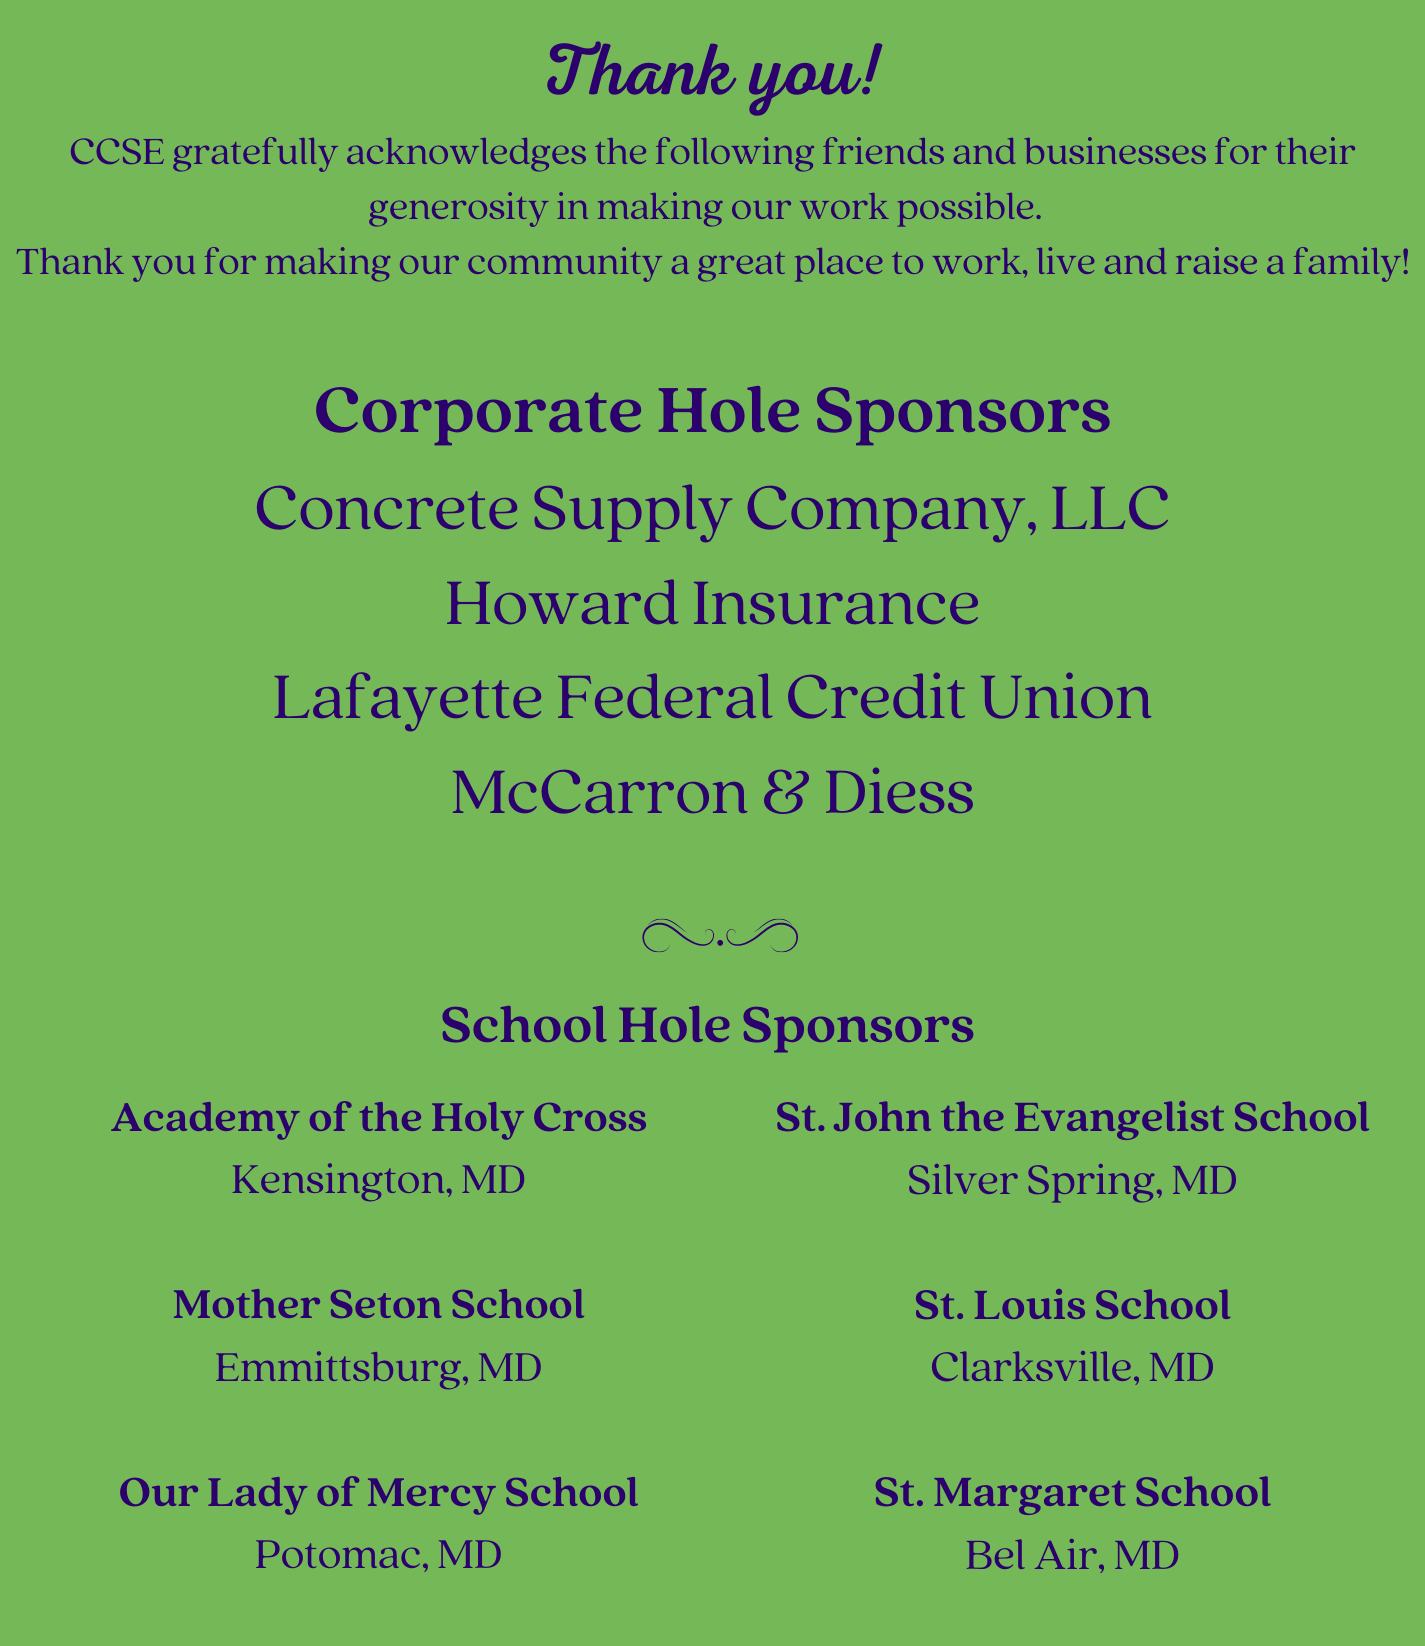 Thank You - Corporate Hole Sponsors!